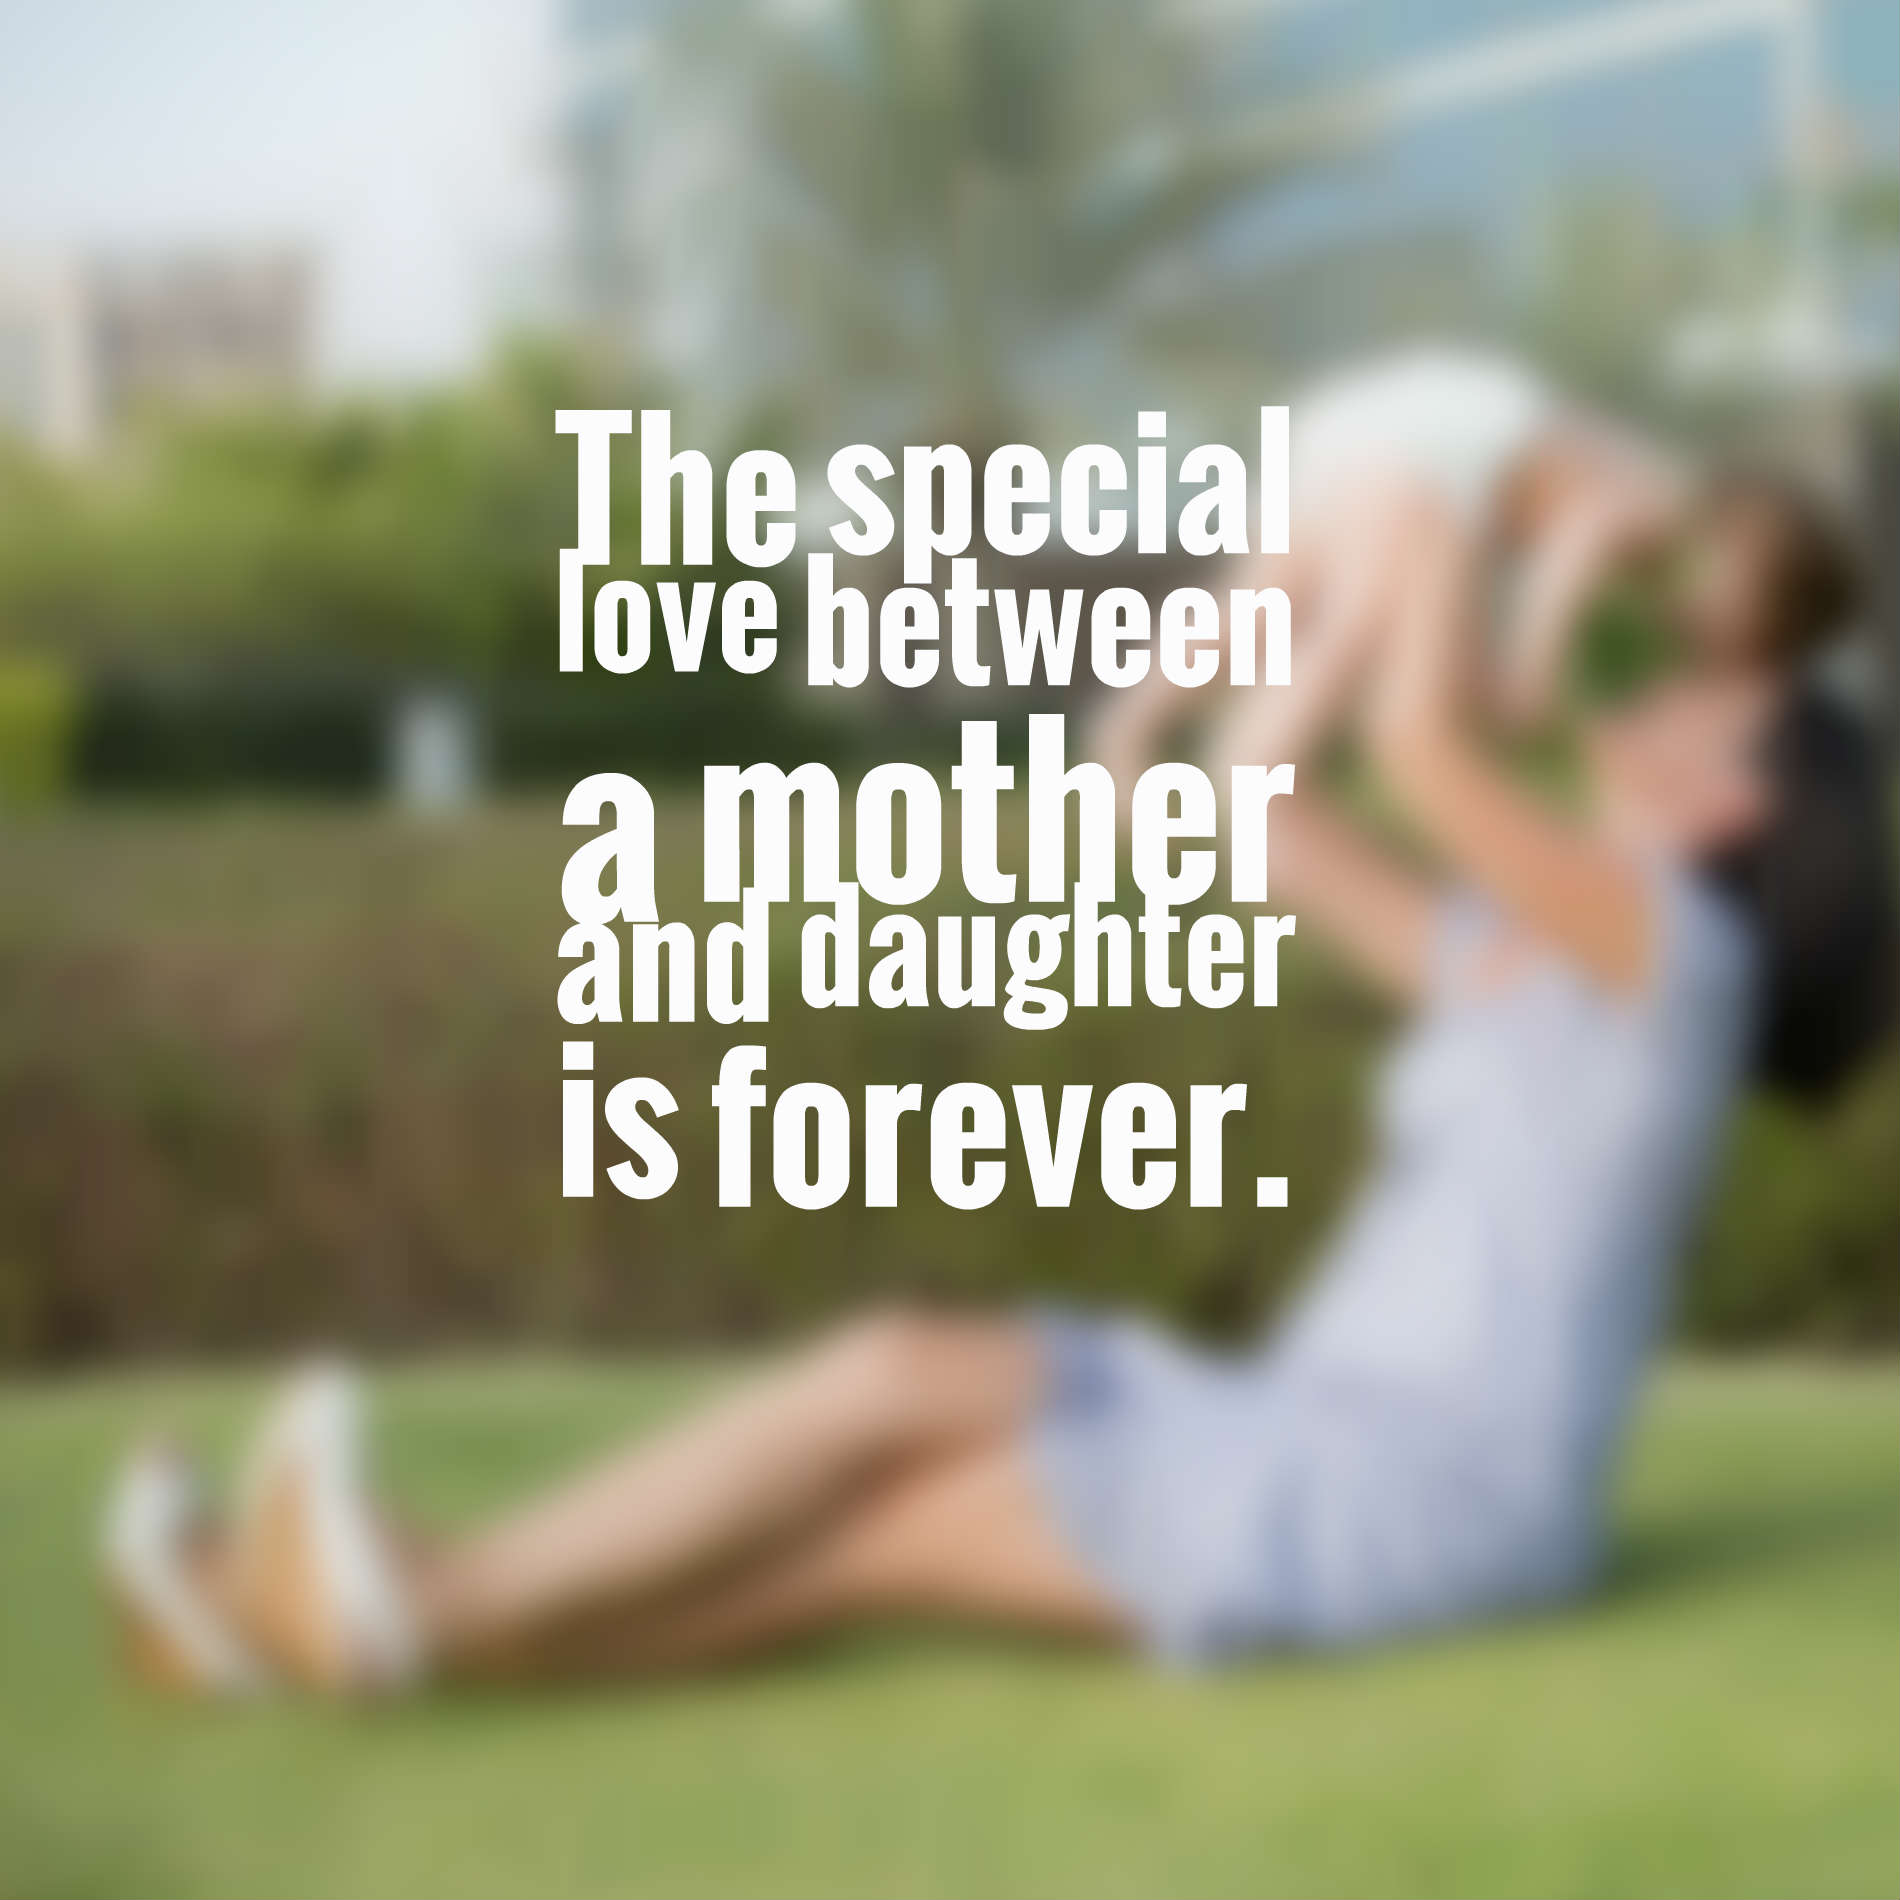 The special love between a mother and daughter is forever.